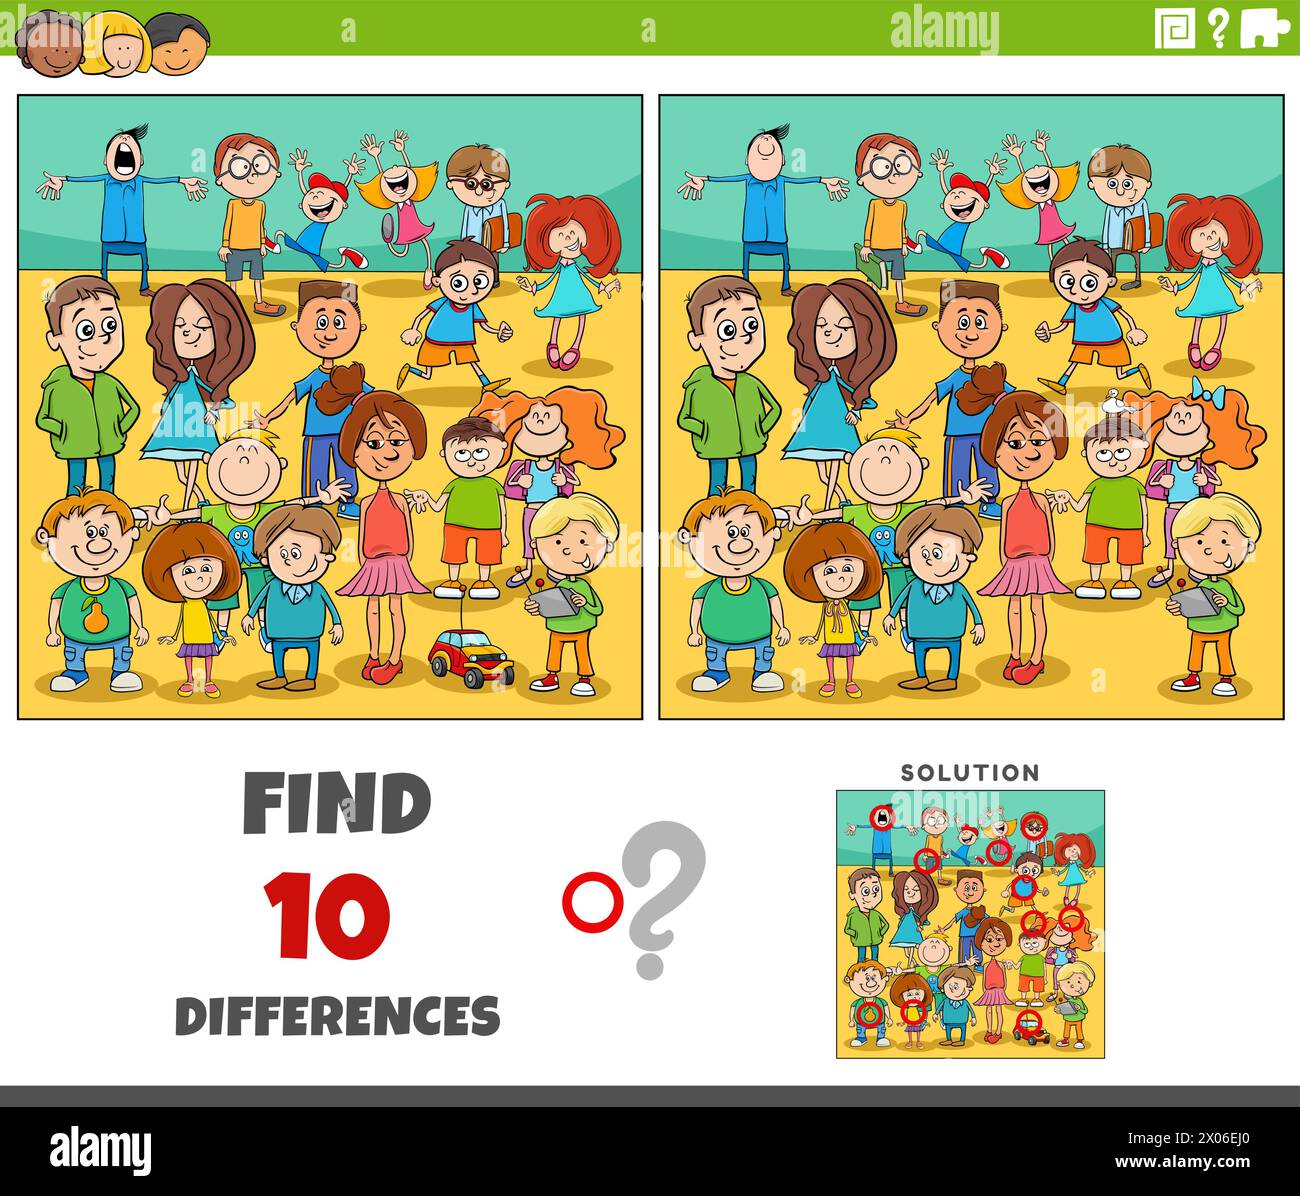 Cartoon illustration of finding the differences between pictures educational activity with children characters Stock Vector